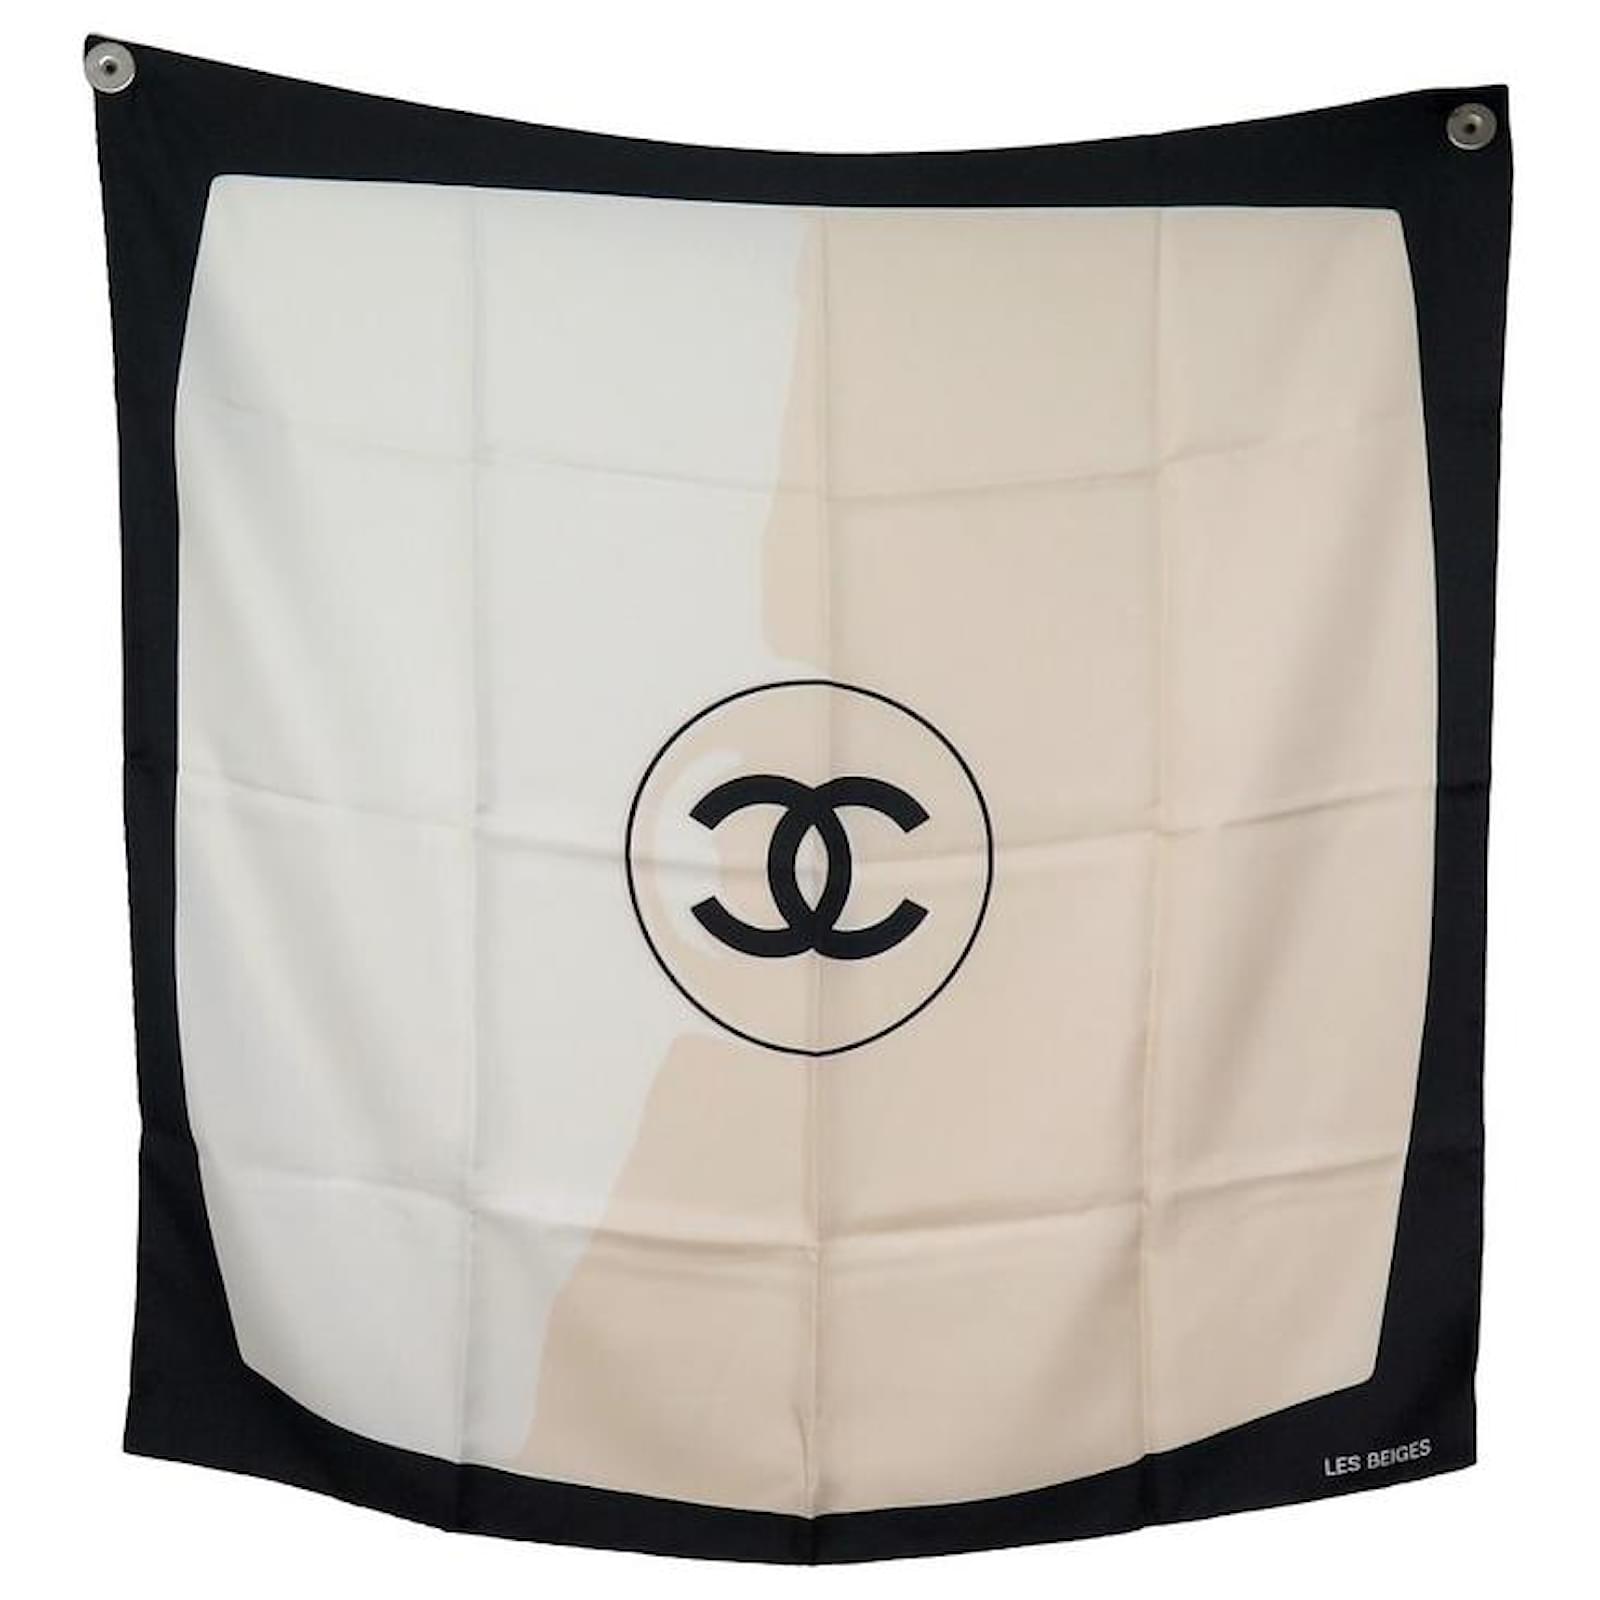 Black White CC LOGO CHANEL SOFT BLANKET THROW for Sale in Macomb, MI -  OfferUp